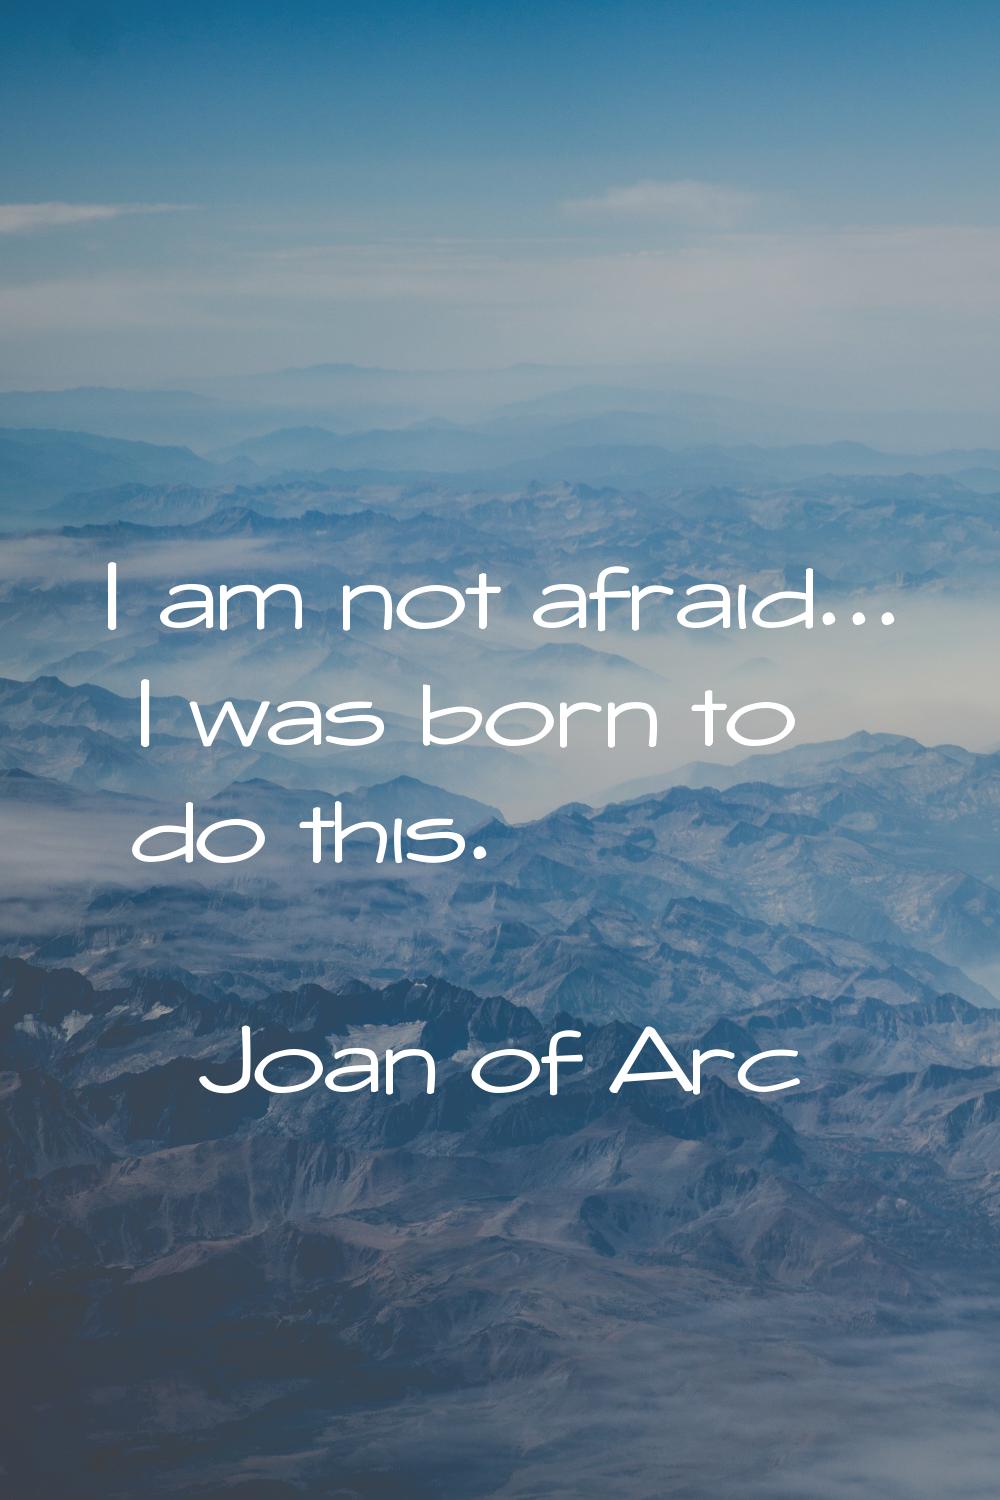 I am not afraid... I was born to do this.